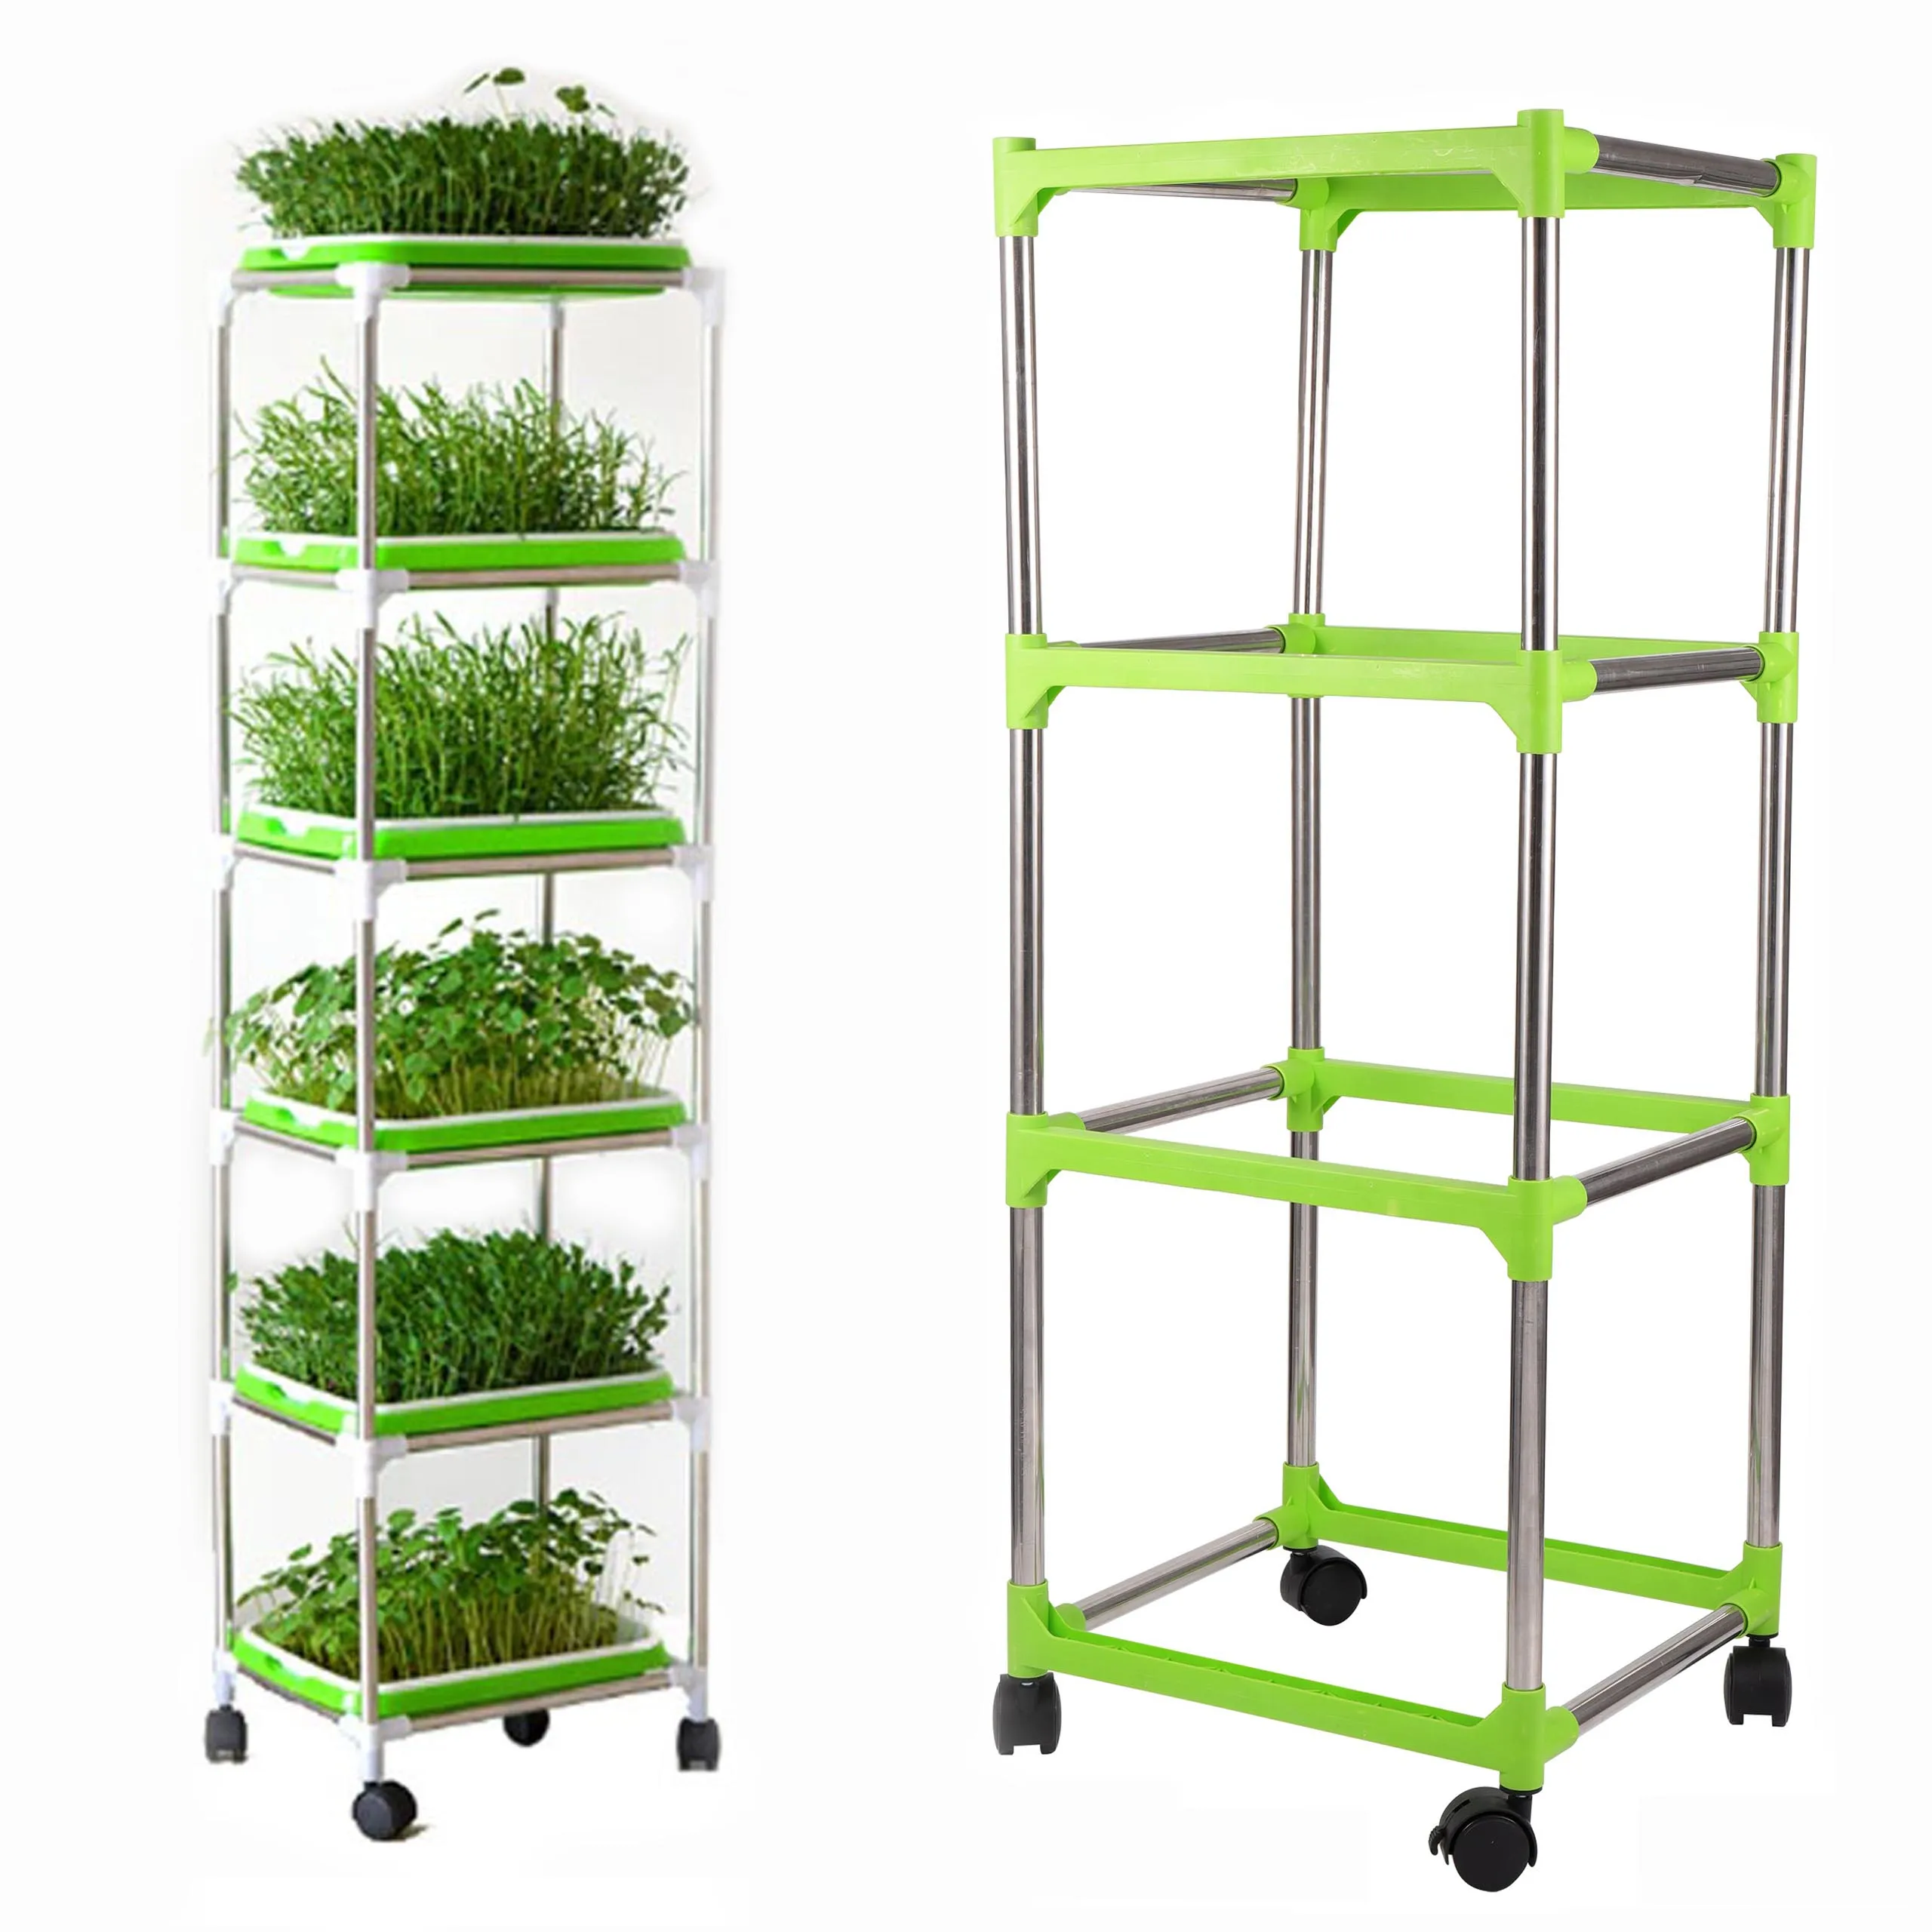 Hydroponic Vegetable Tray Assembly Frame Stainless Steel Tube Bean Sprout Nursery Tray Shelf Universal Wheel DIY Planting Rack